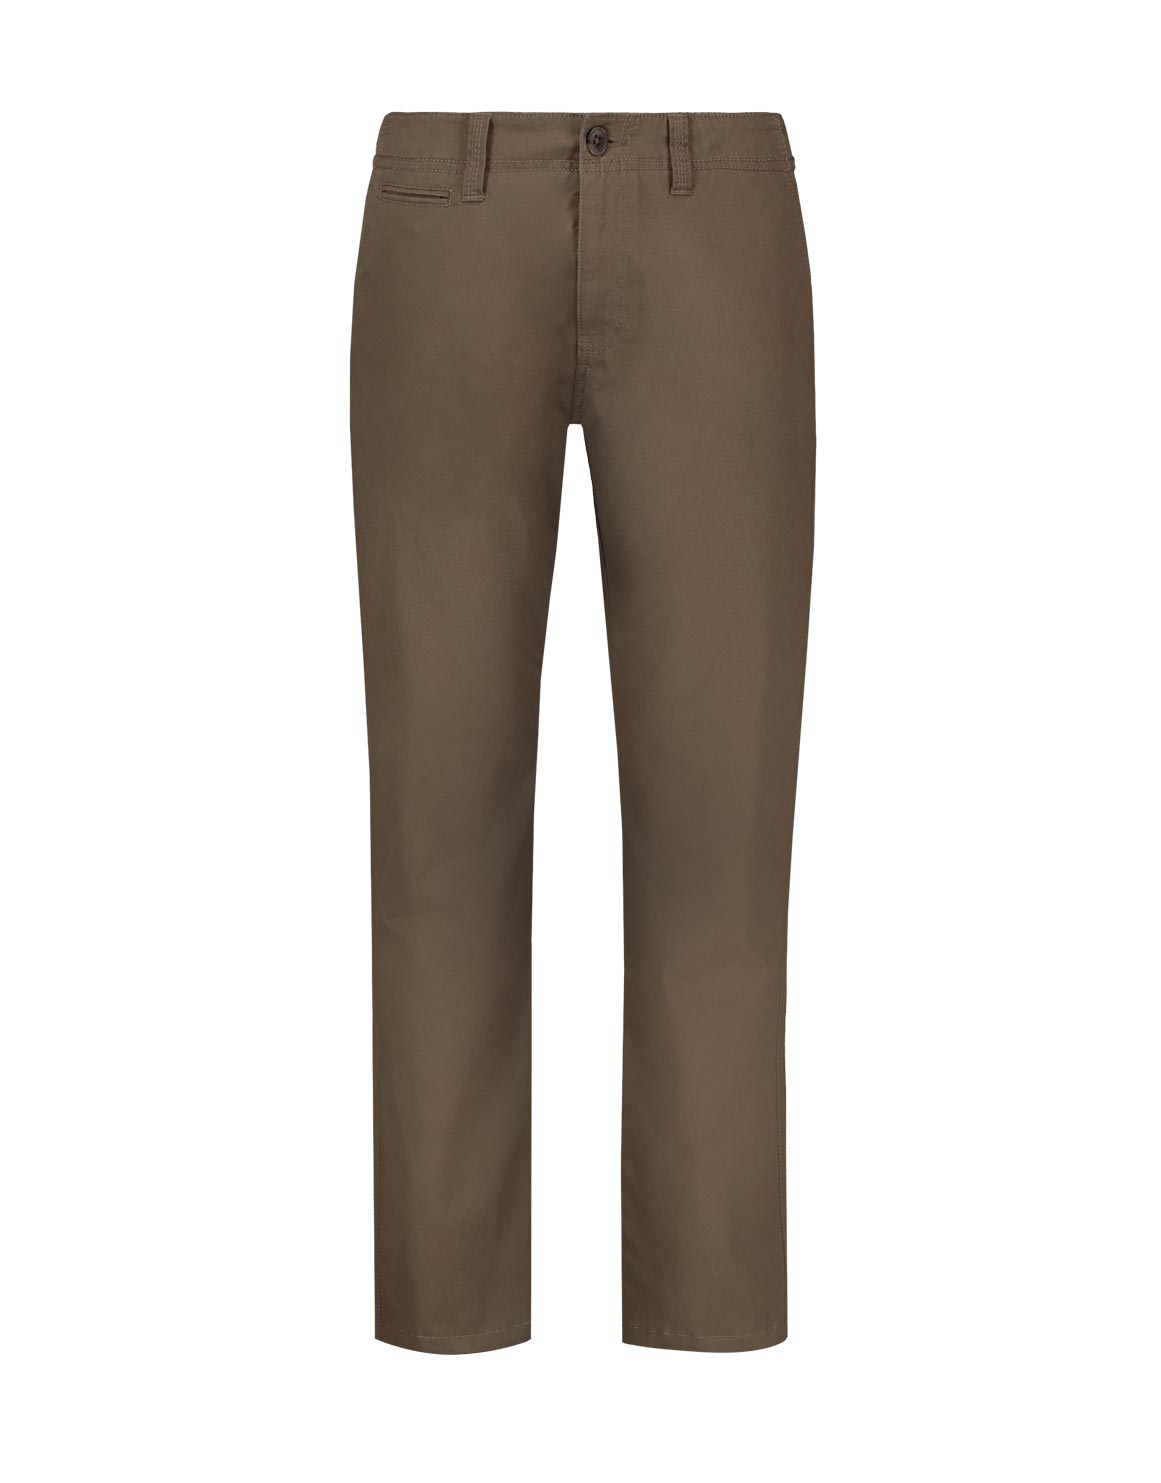 Straight Leg Cotton Chinos with Stretch - Woolworths Mauritius Online